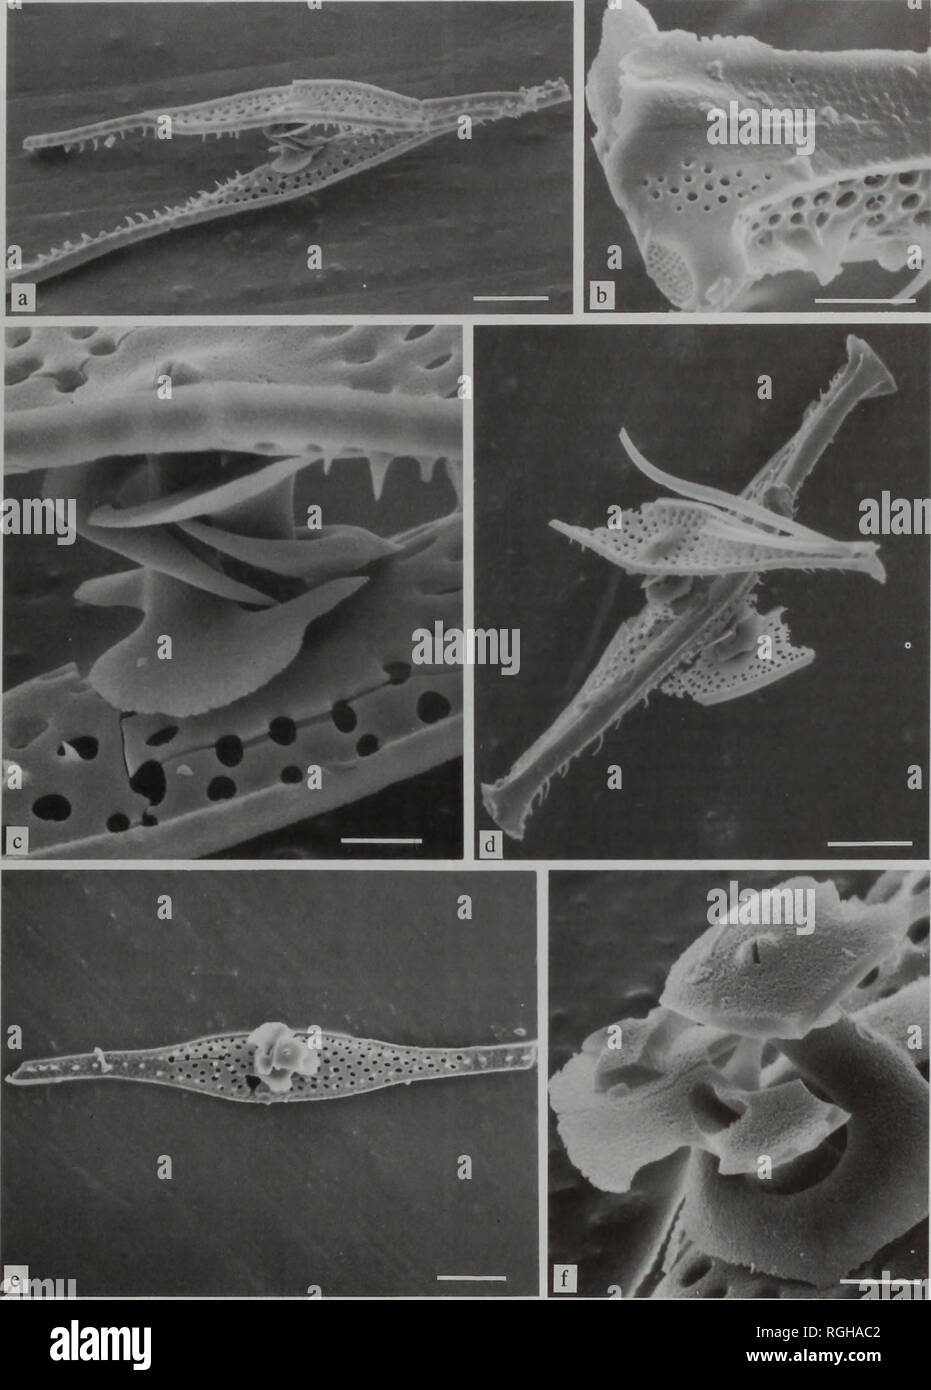 . Bulletin of the British Museum (Natural History), Botany. REVISION OF RUTILARIA GREVILLE (BACILLARIOPHYTA) 77. Plate VIII Rutilaria schenkii. Cantua Creek, Fresno County, California, U.S.A. (a): oblique view of sibling pair of valves (SEM 97982); (b): detail of (d), apex of frustule showing ocellus with porelli, poroids on mantle near apex and costa on proximal side of elevation (SEM 98051); (c): detail of (a) showing periplekta with flange and interlocking tips of longer arms (SEM 97981); (d): oblique view of frustule with parts of sibling valves attached (SEM 97978); (e): valve view of val Stock Photo